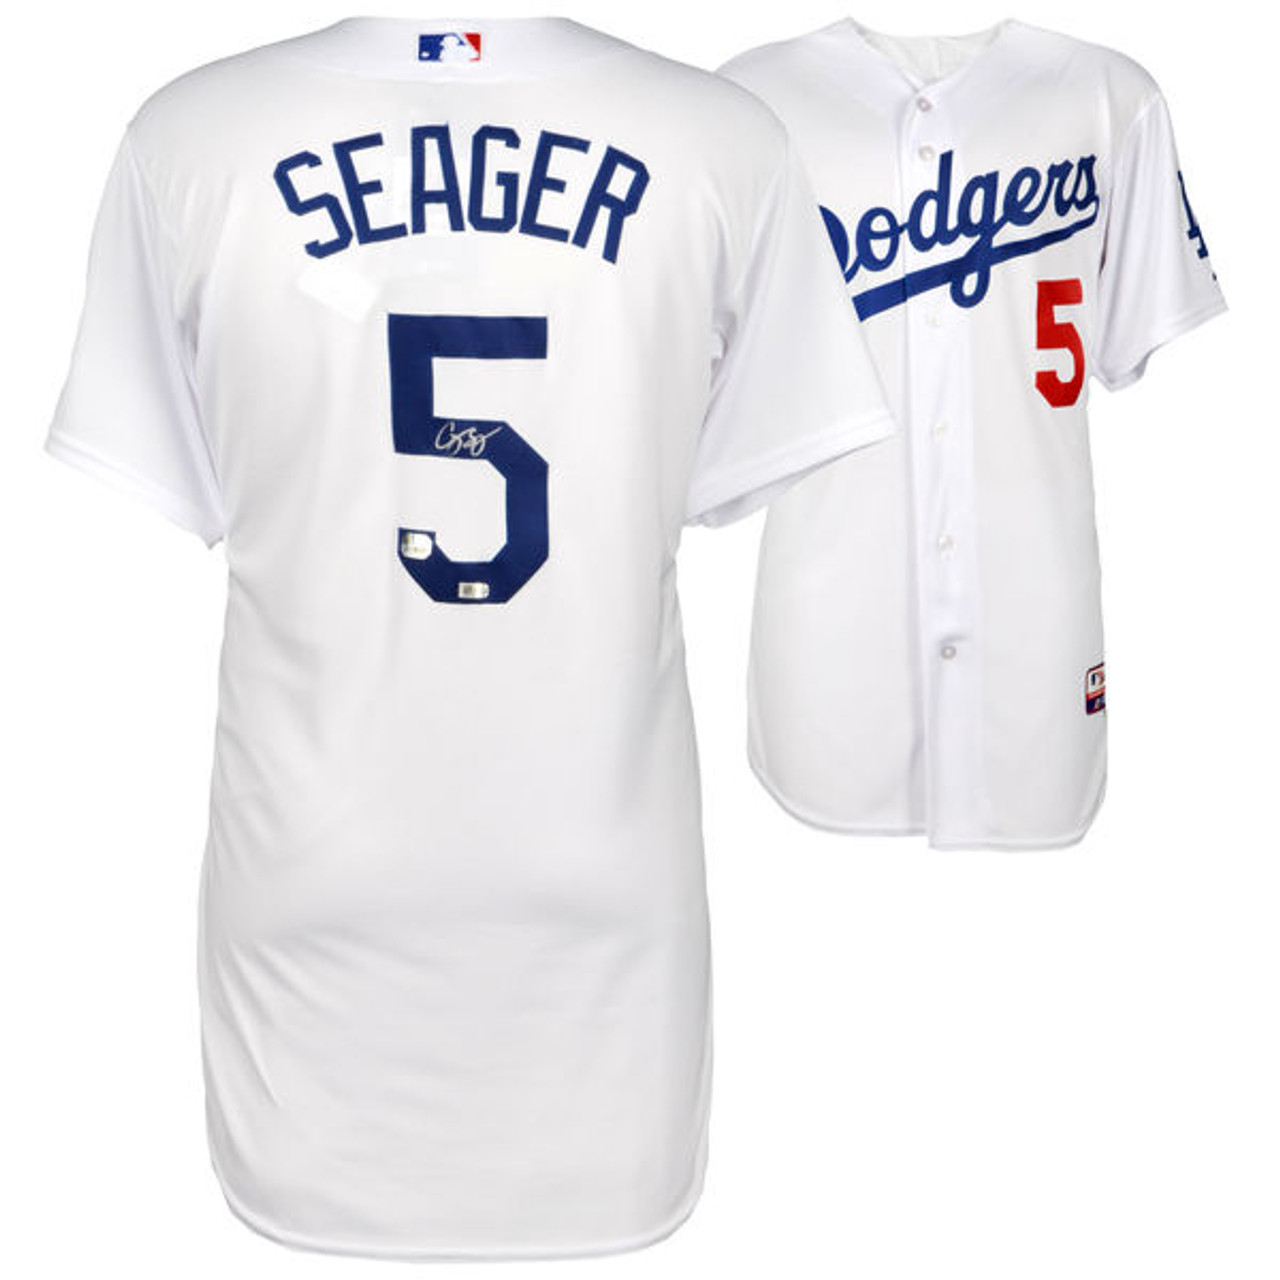 COREY SEAGER Los Angeles Dodgers Autographed White Authentic Jersey  FANATICS - Game Day Legends